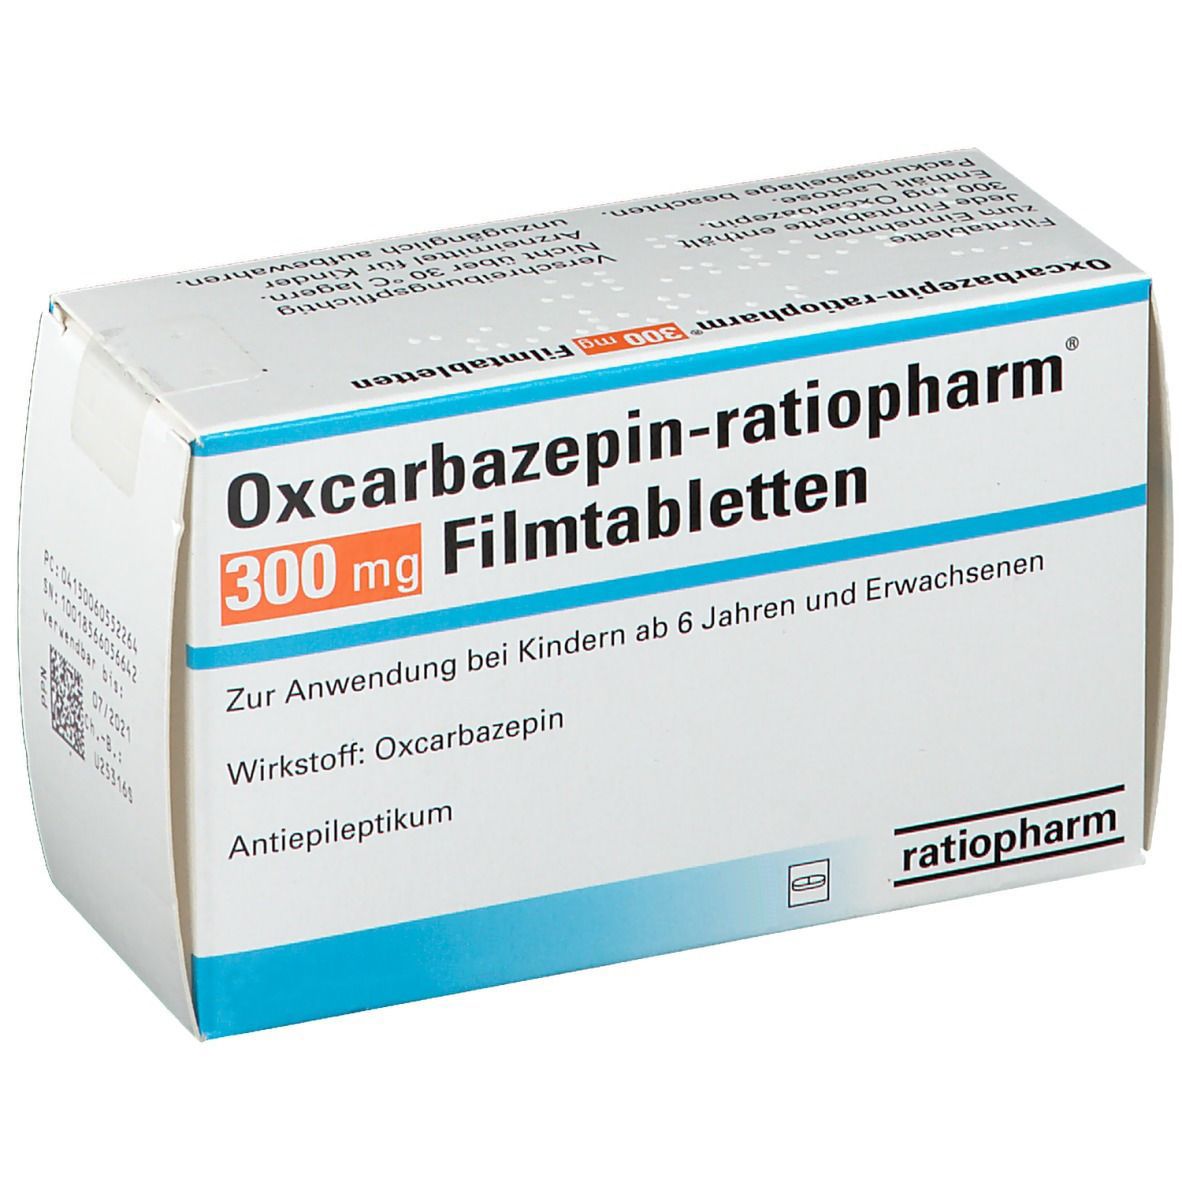 Oxcarbazepin-ratiopharm® 300 mg